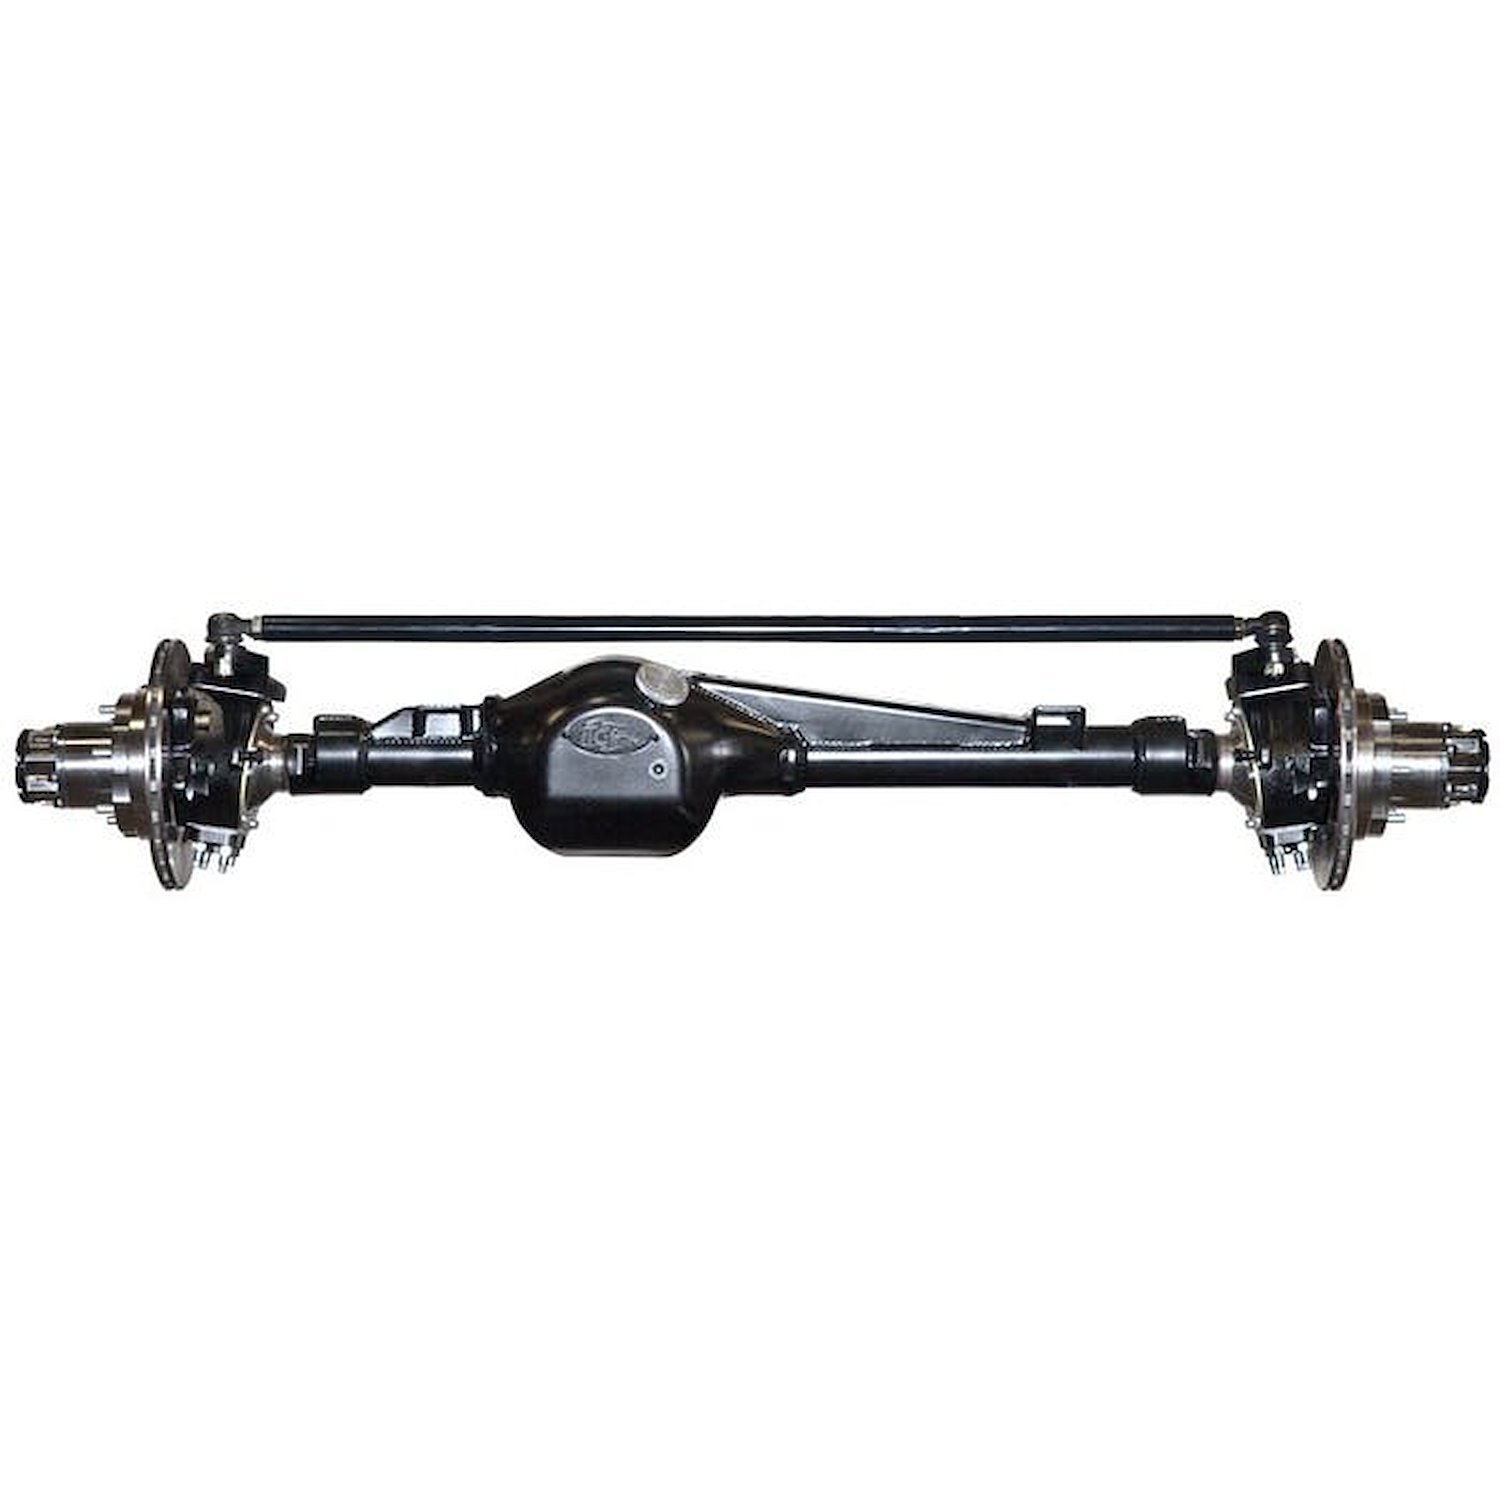 301613-1-KIT Rock Assault Fully-Built Front Axles, +3 Width, RHD, High-Pinion, 5.29, Grizzly, Locking Hubs, Toyota